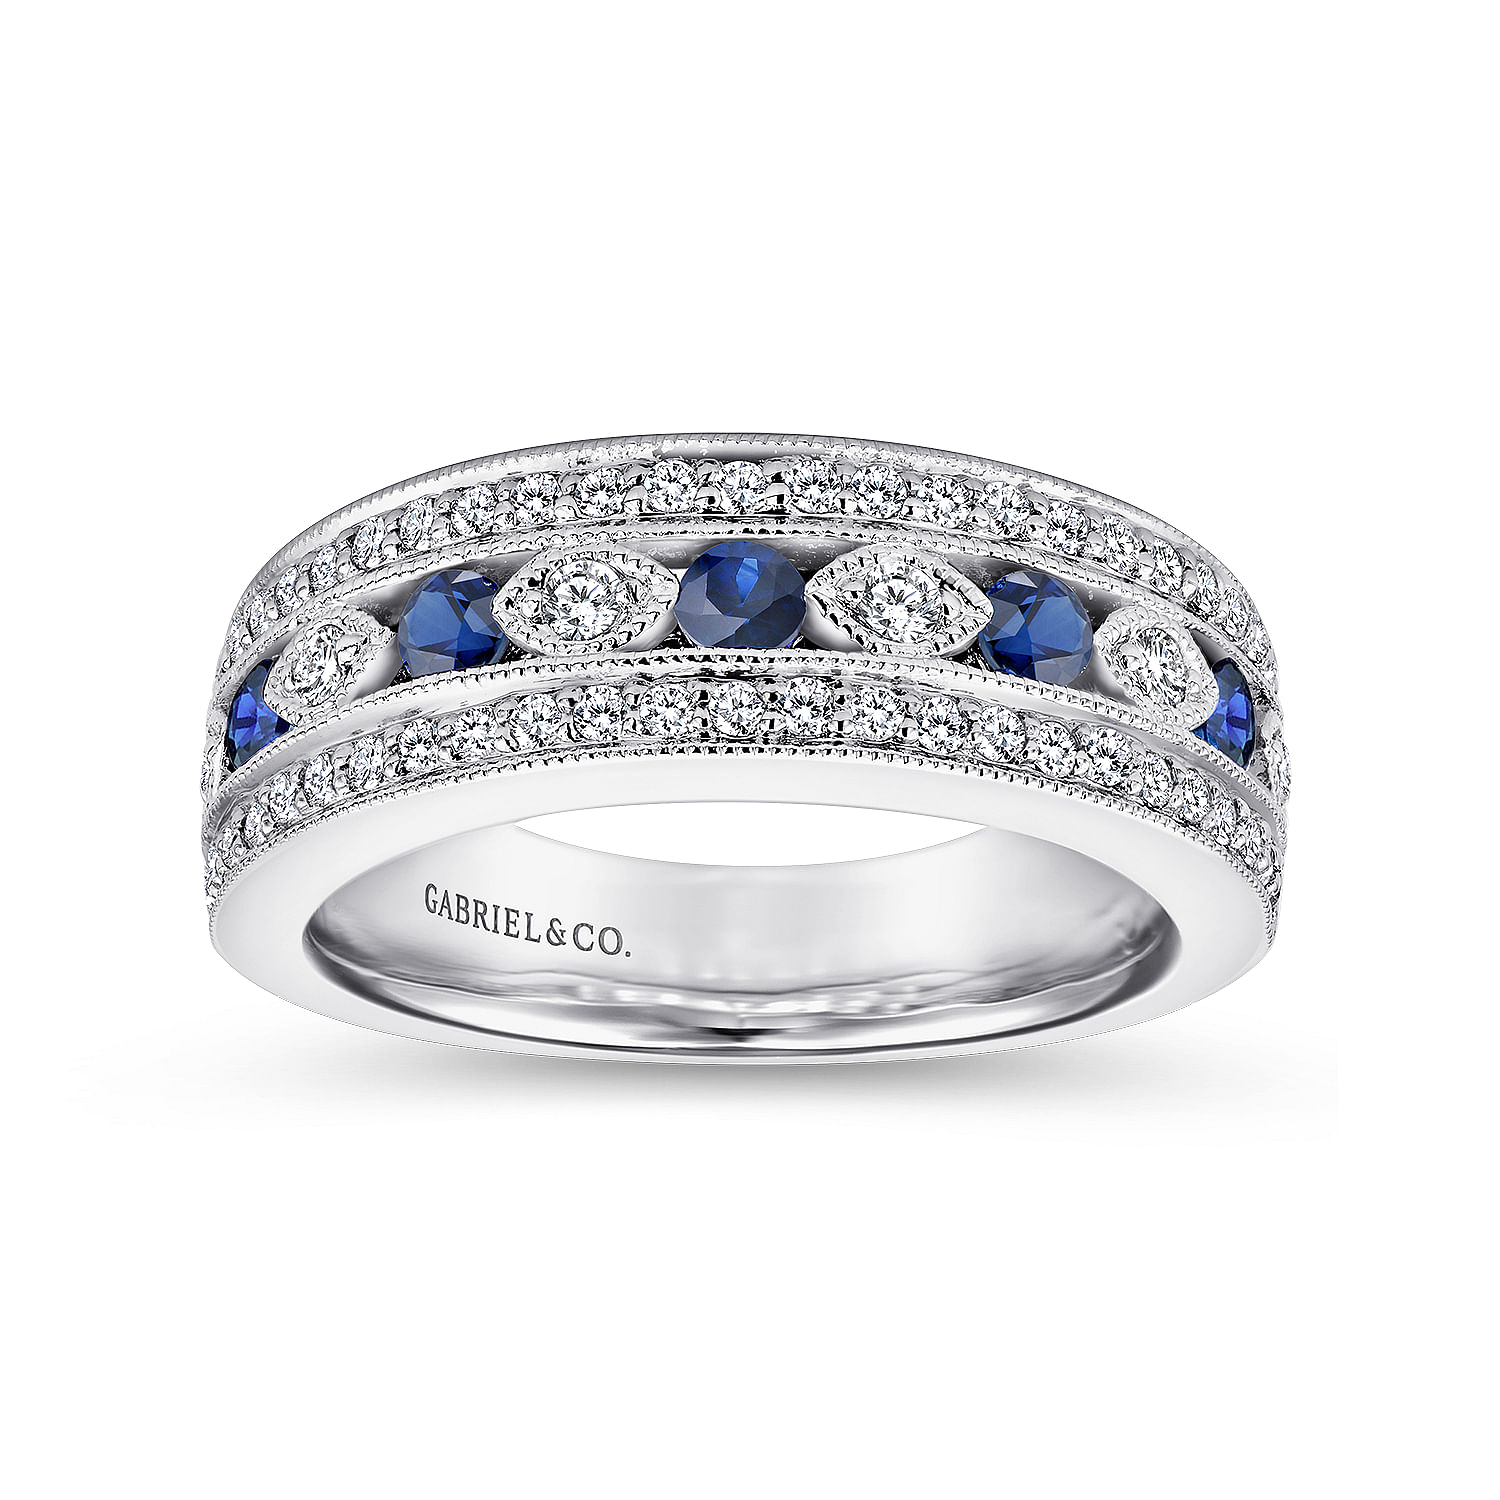 14K White Gold Vintage Inspired Sapphire and Diamond Ring